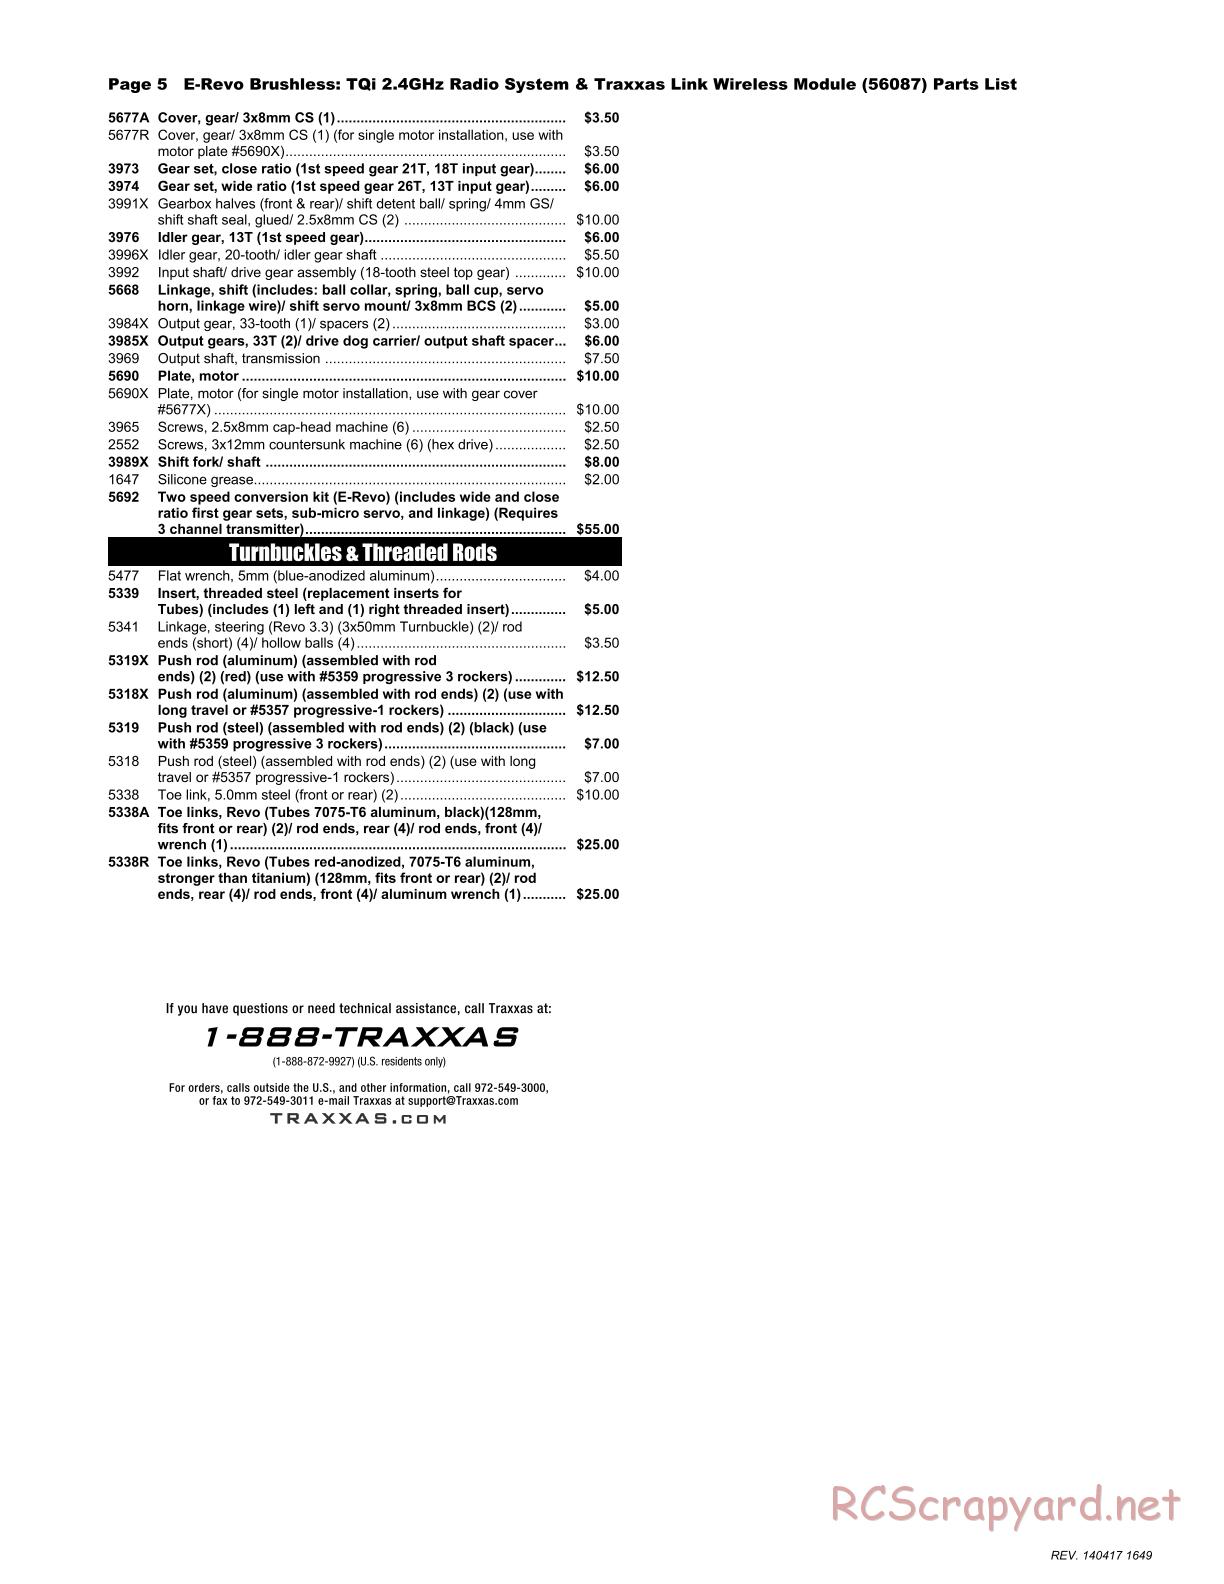 Traxxas - E-Revo Brushless (2014) - Parts List - Page 5